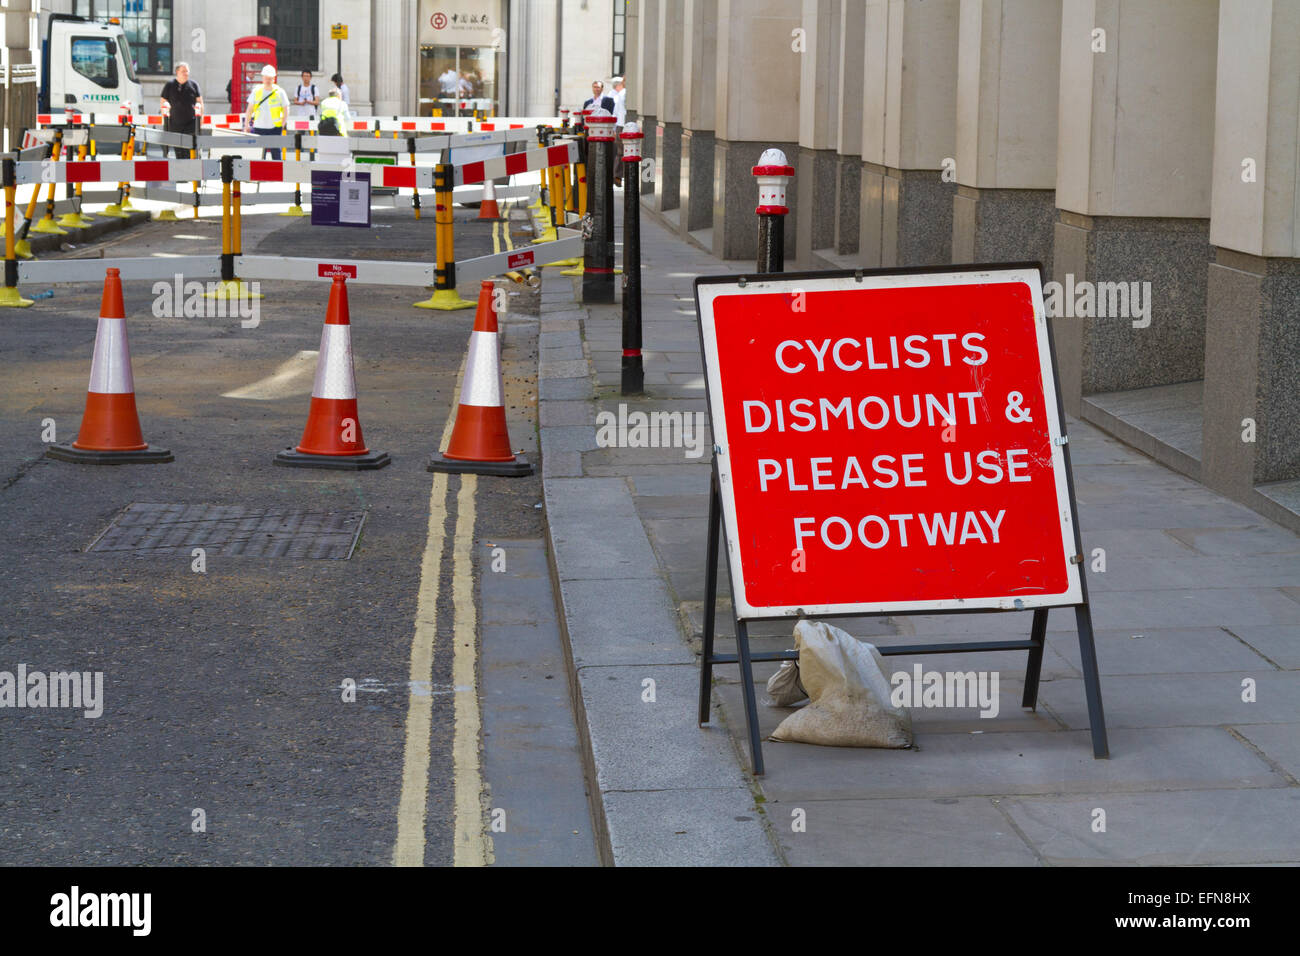 Road sign 'Cyclists dismount & please use footway' Stock Photo